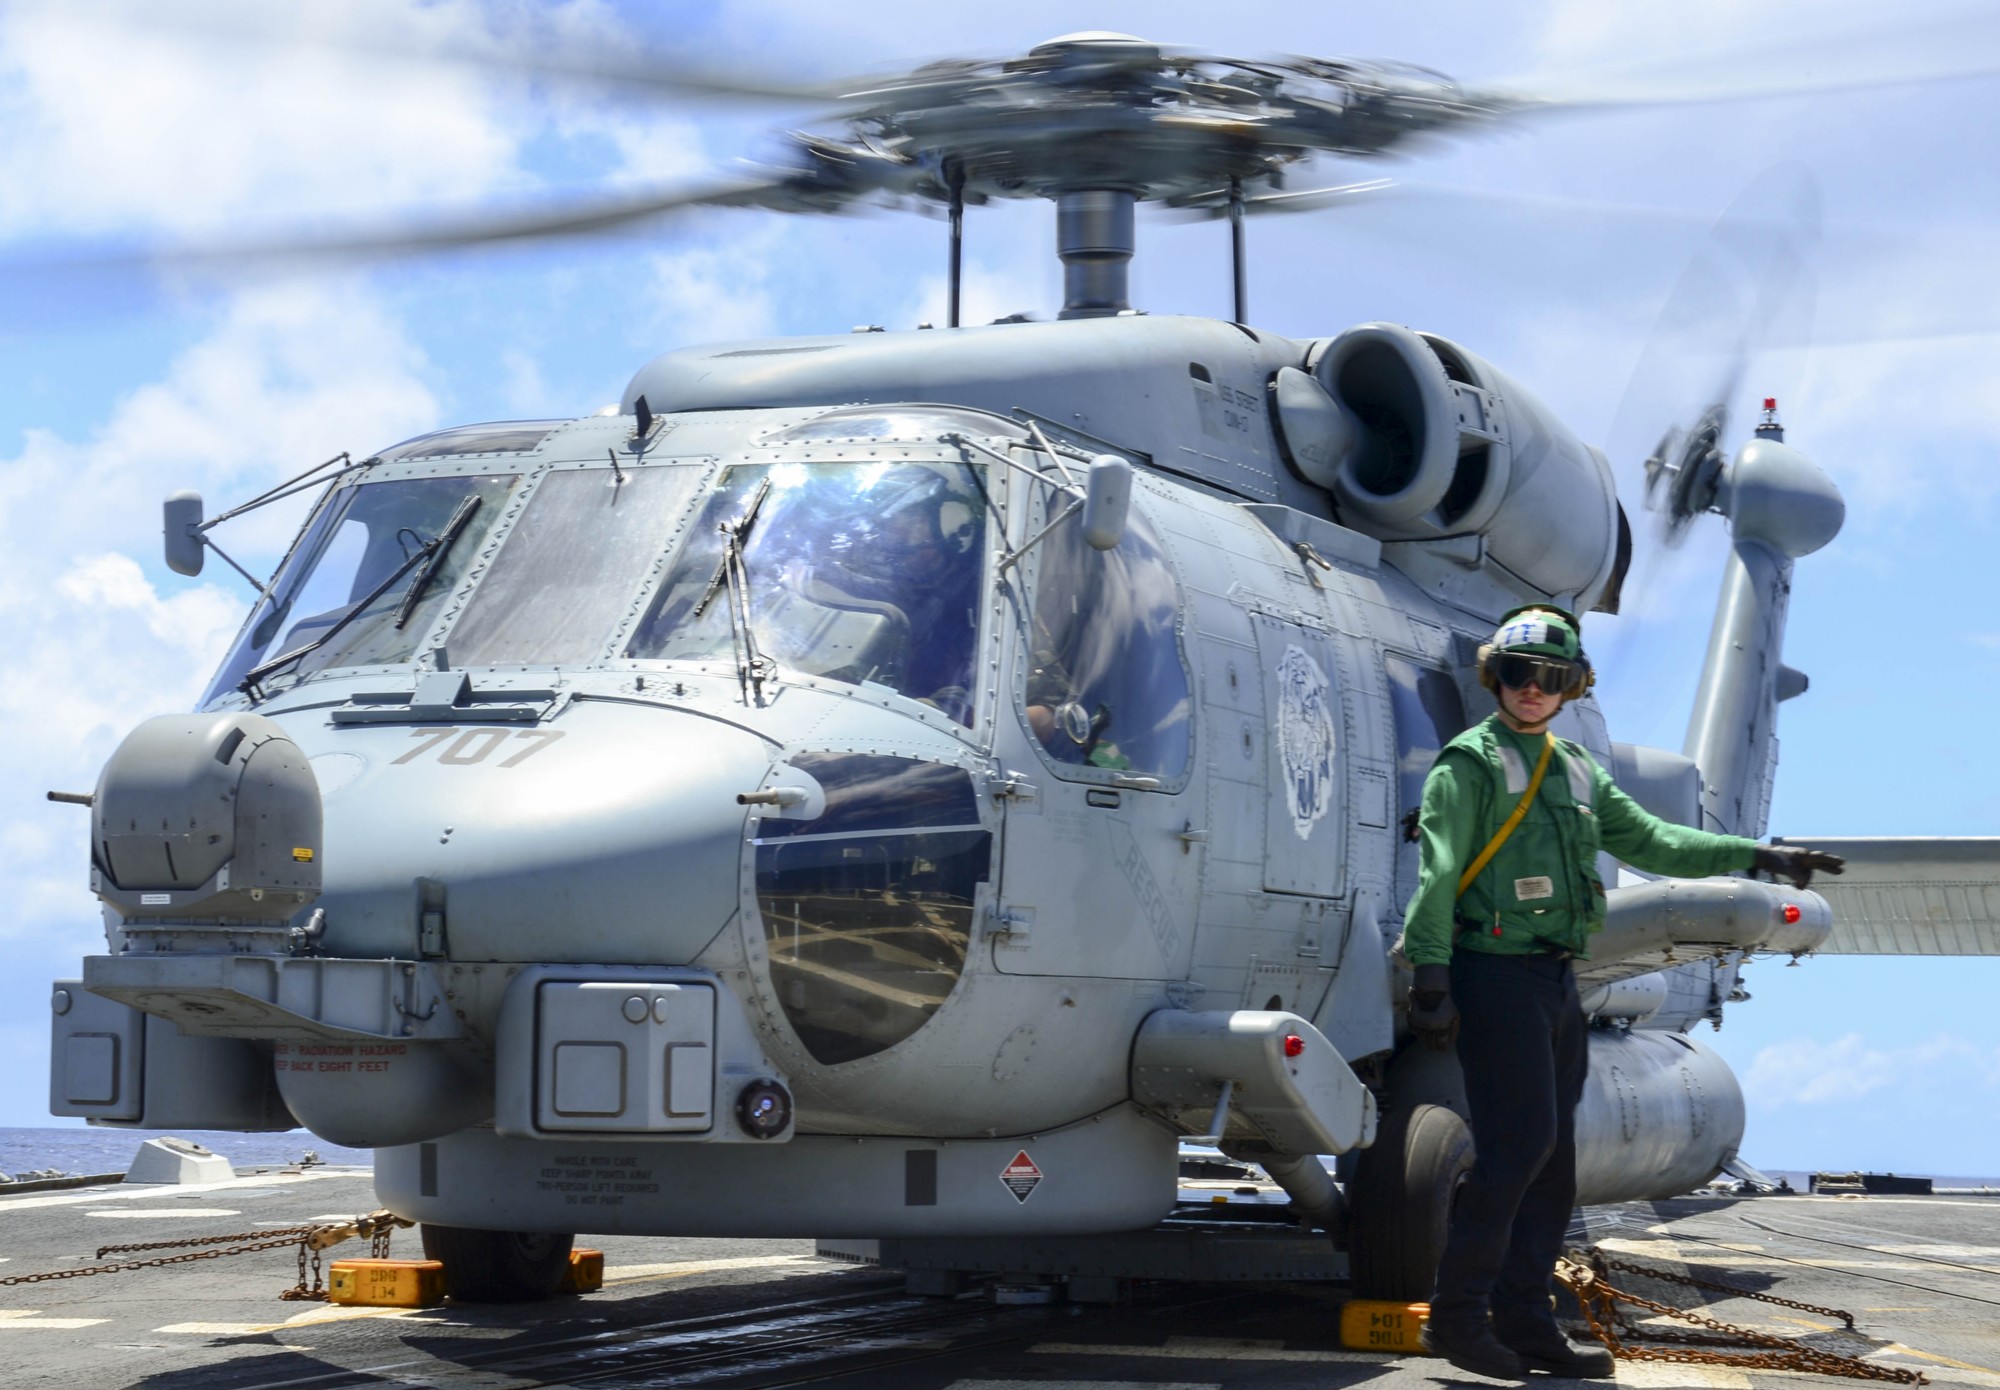 hsm-73 battlecats helicopter maritime strike squadron us navy mh-60r seahawk 2016 06